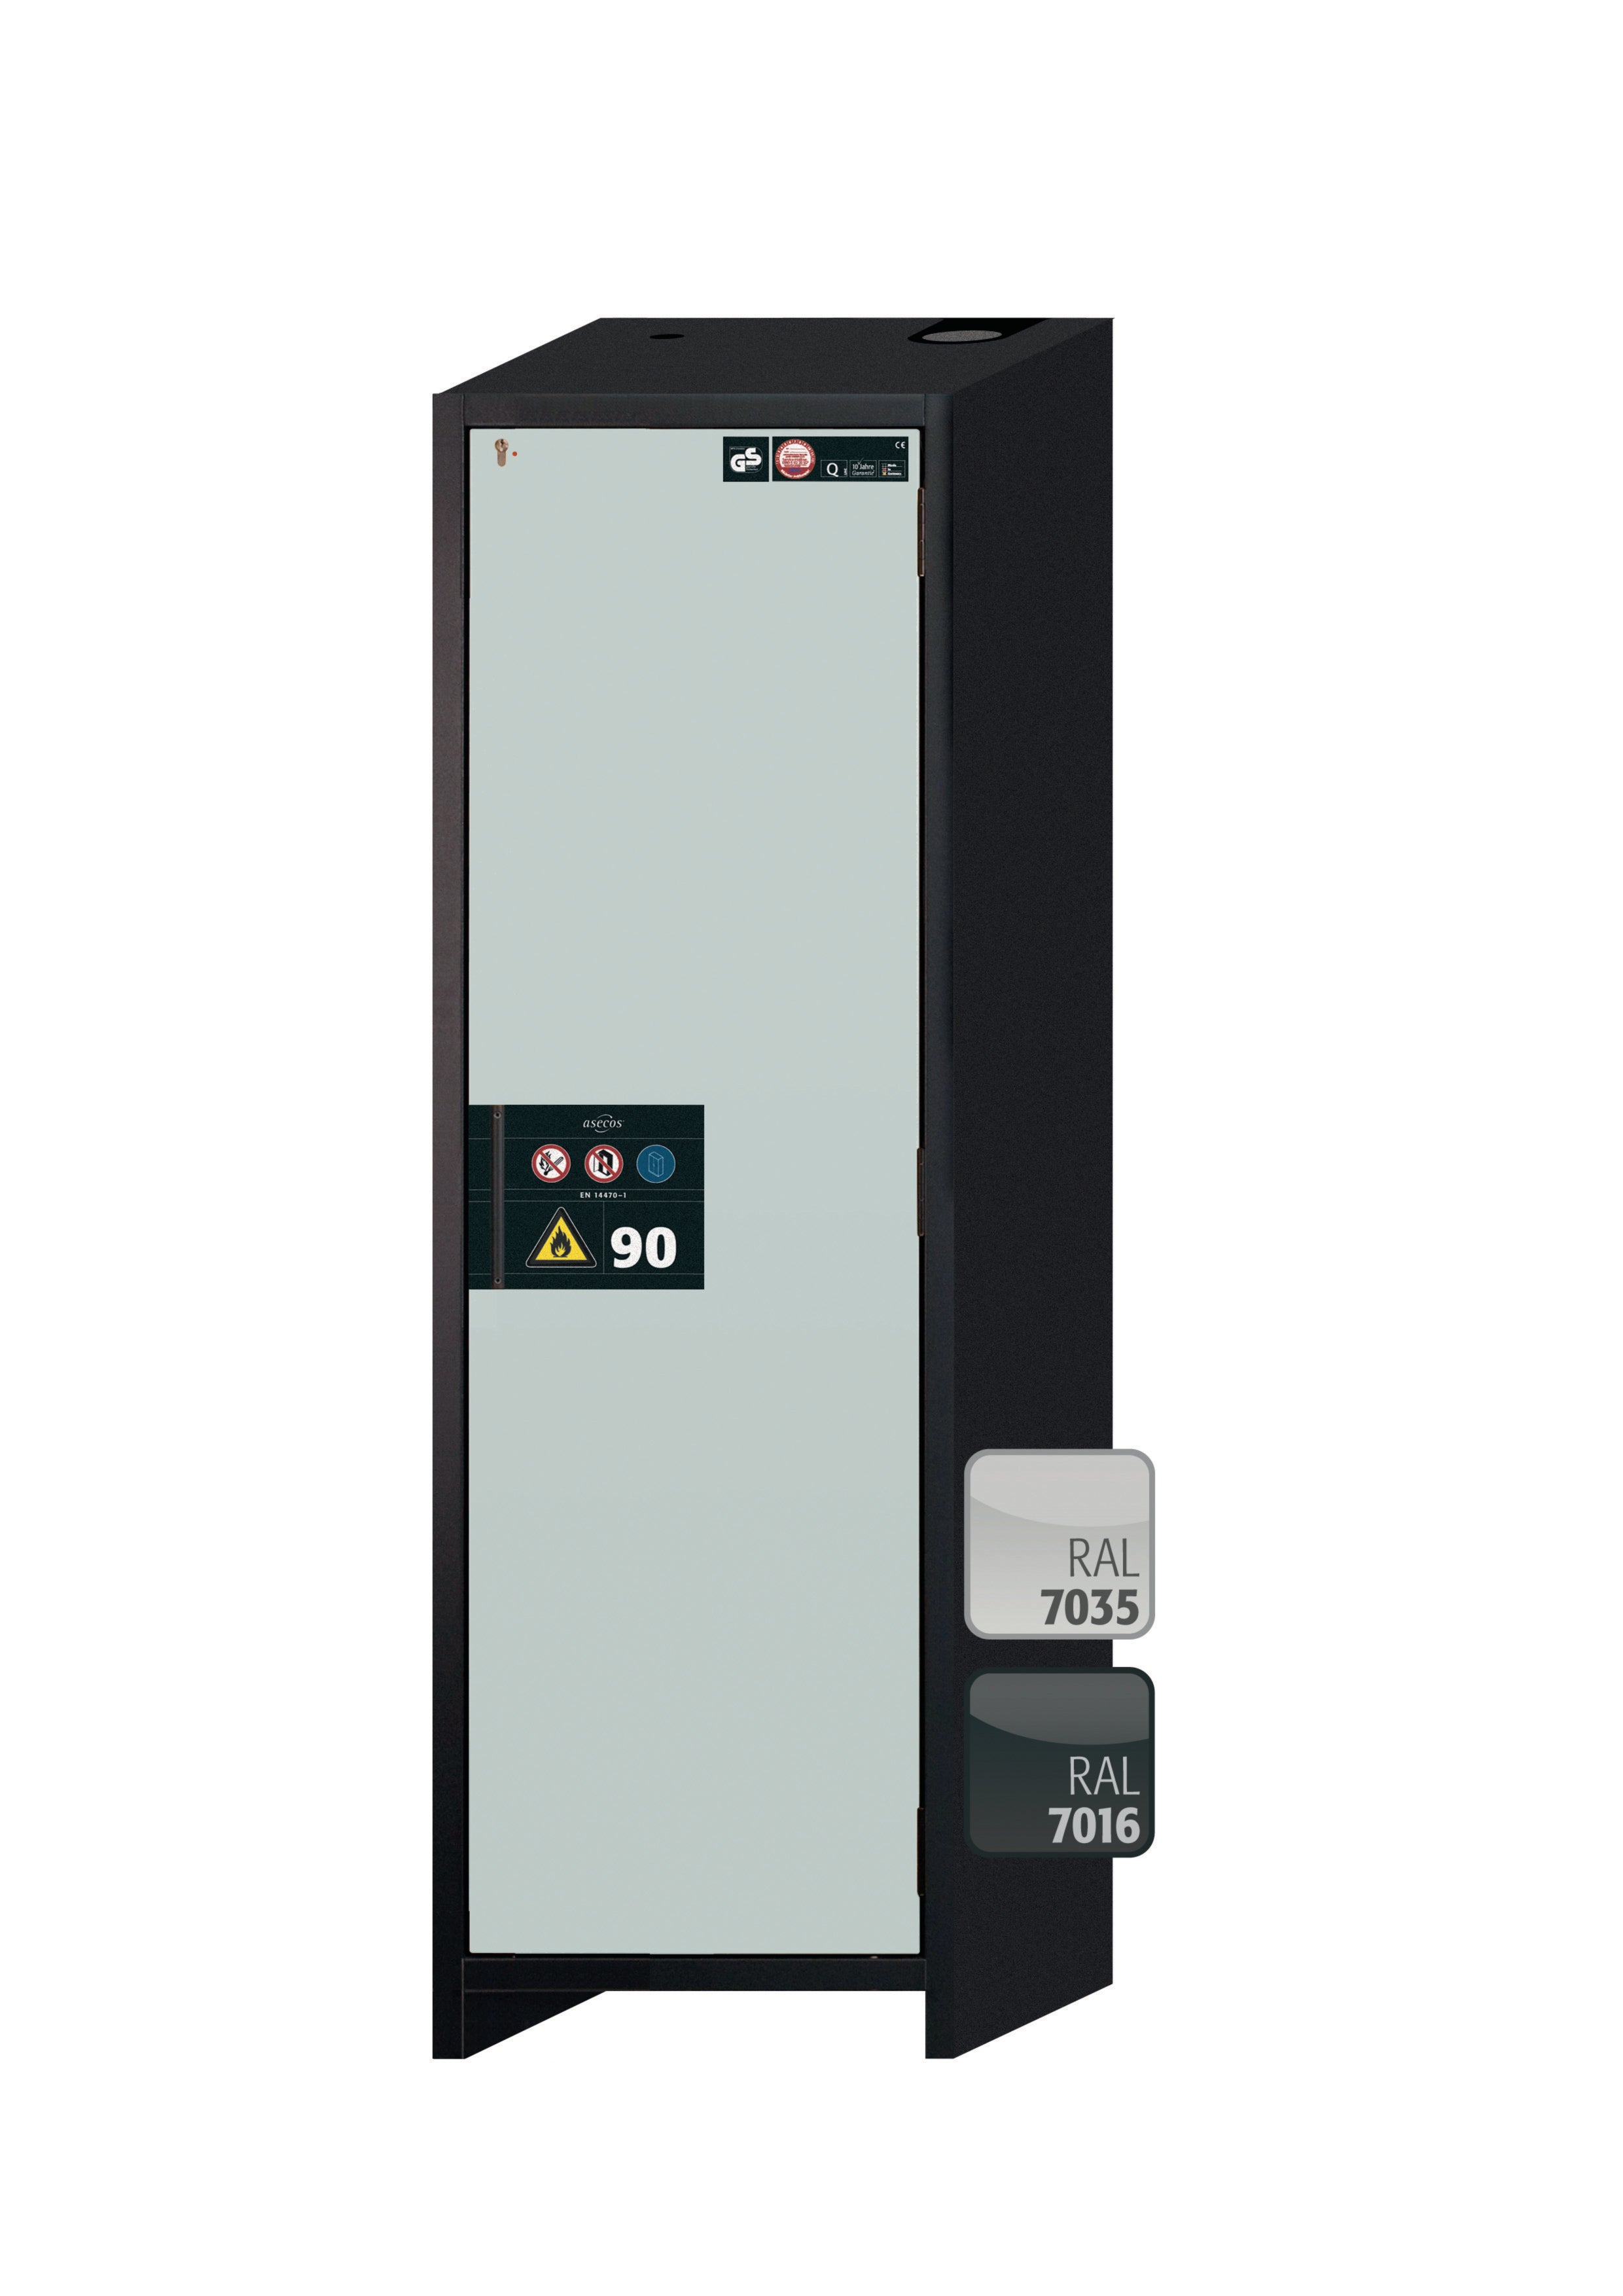 Type 90 safety storage cabinet Q-CLASSIC-90 model Q90.195.060.R in light grey RAL 7035 with 4x drawer (standard) (stainless steel 1.4301),